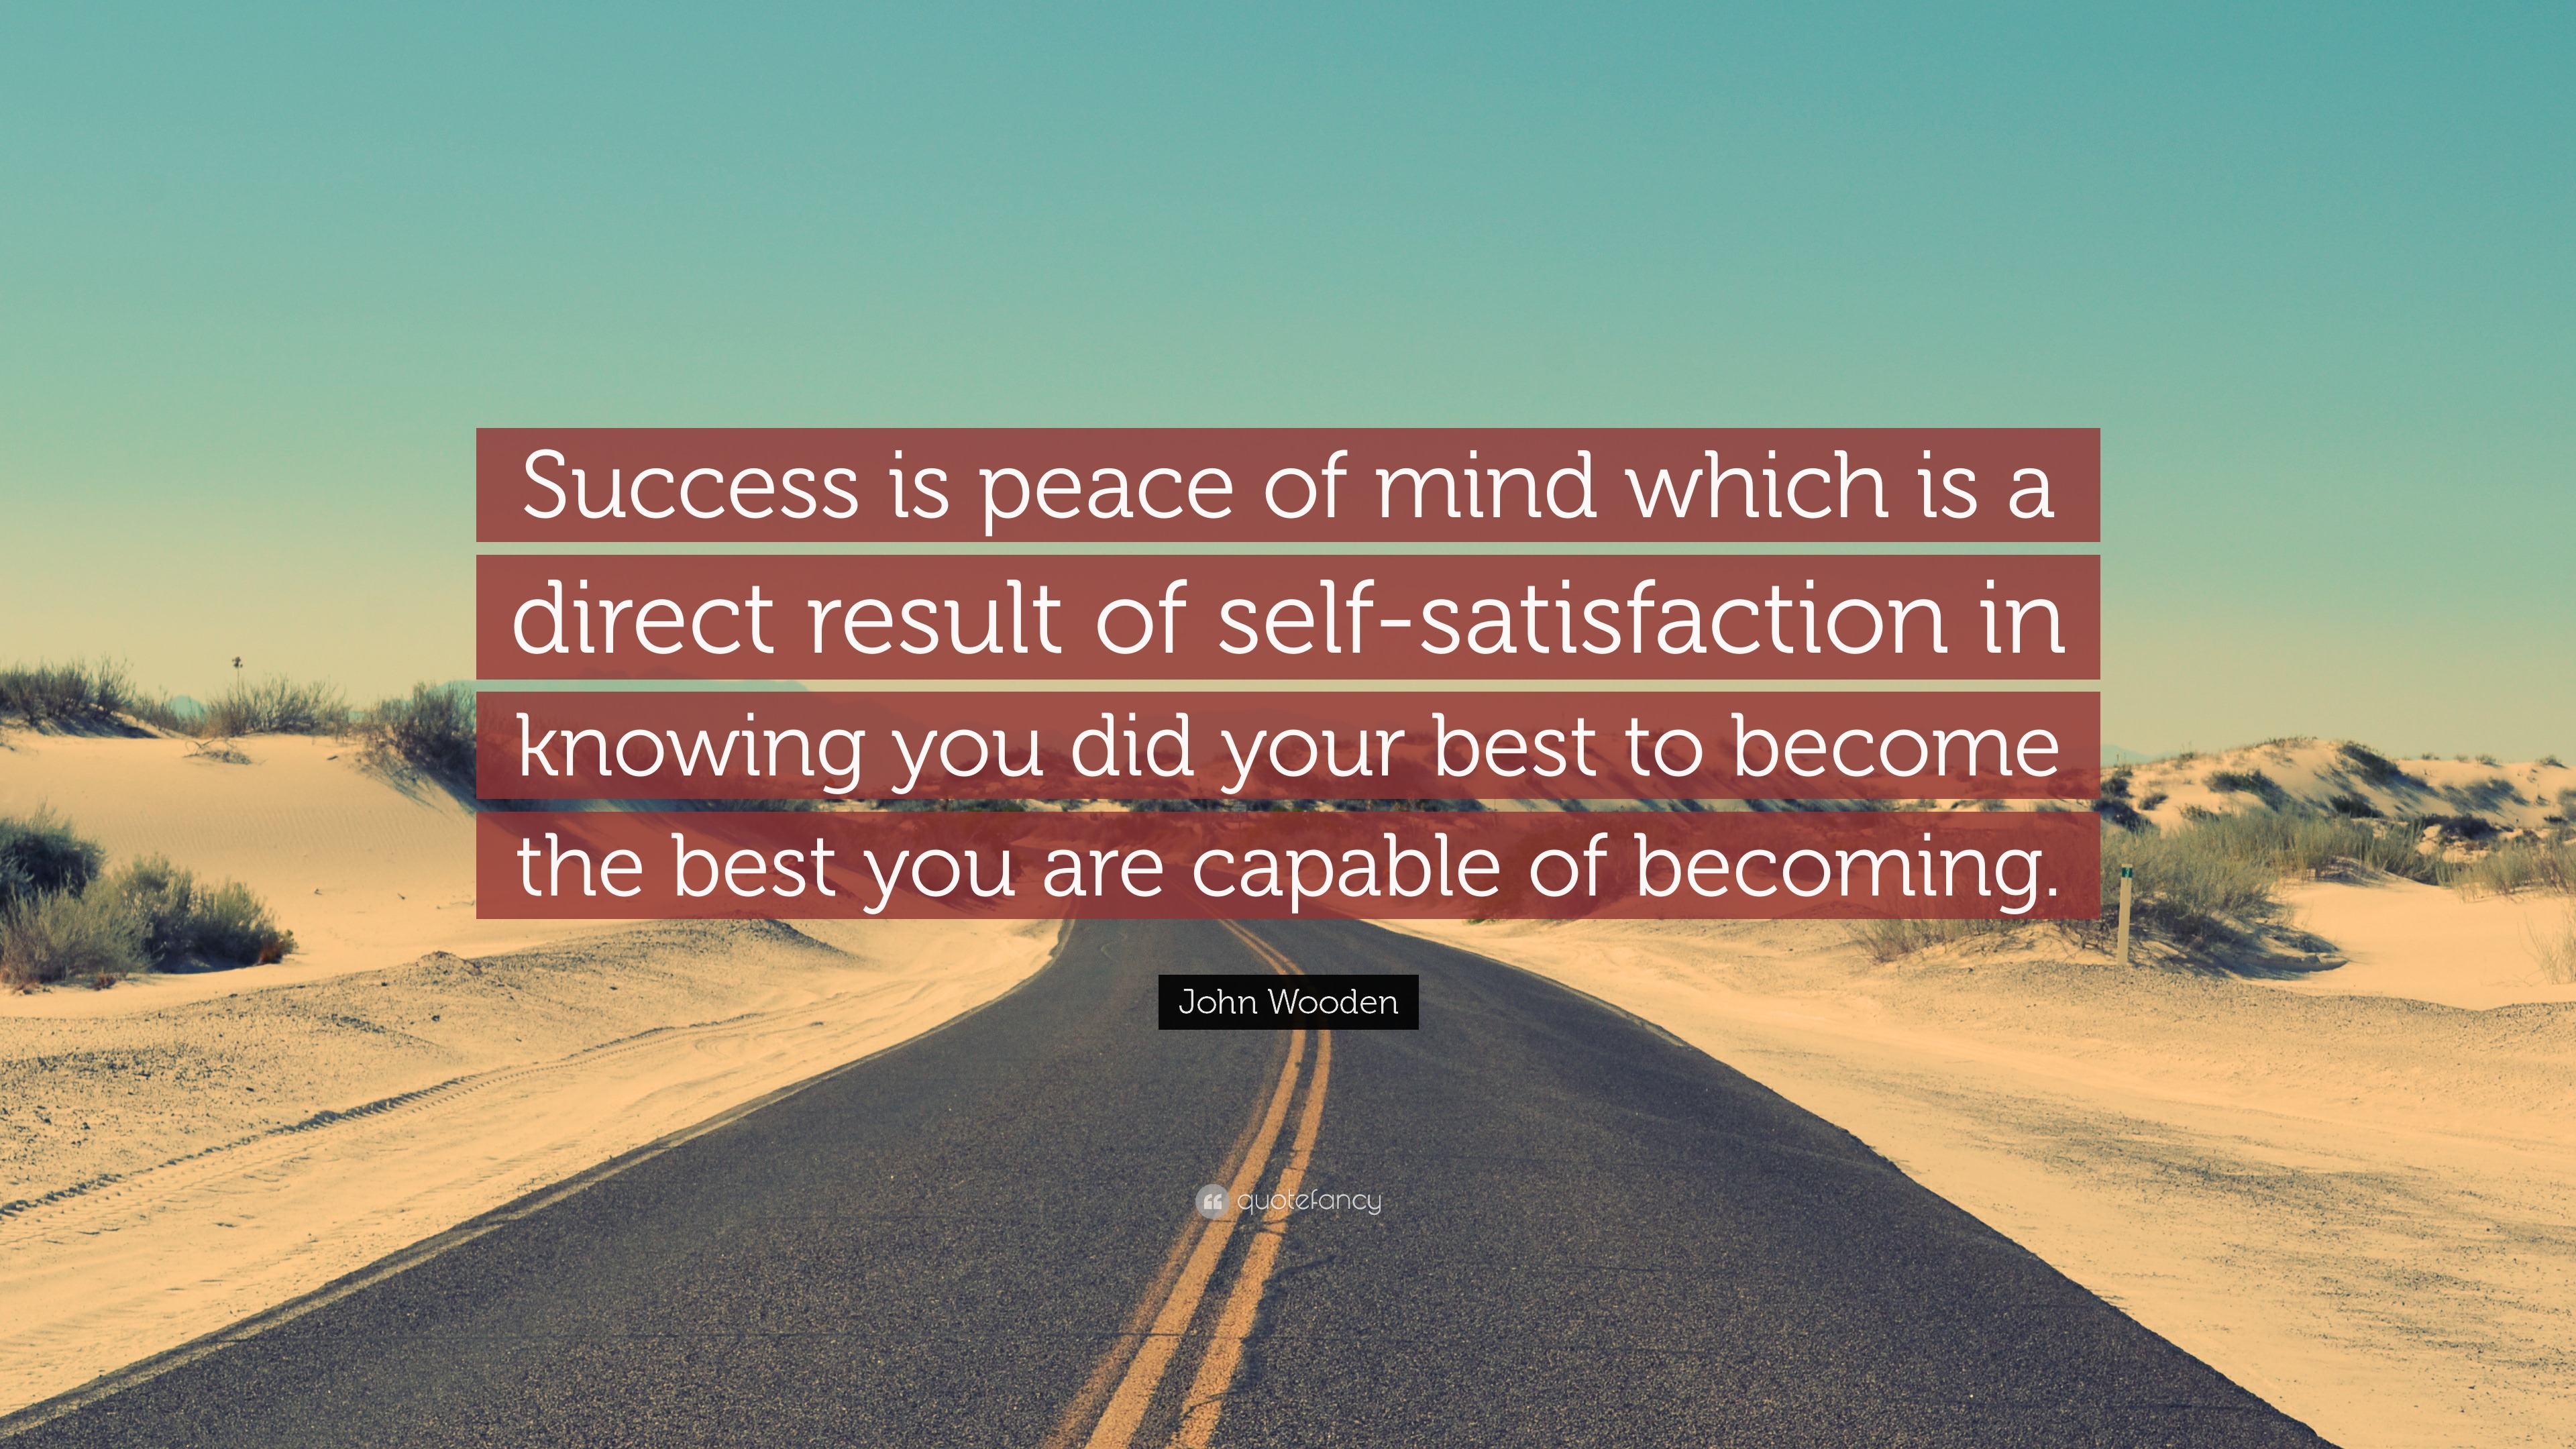 John Wooden Quote: “Success is peace of mind which is a direct result ...